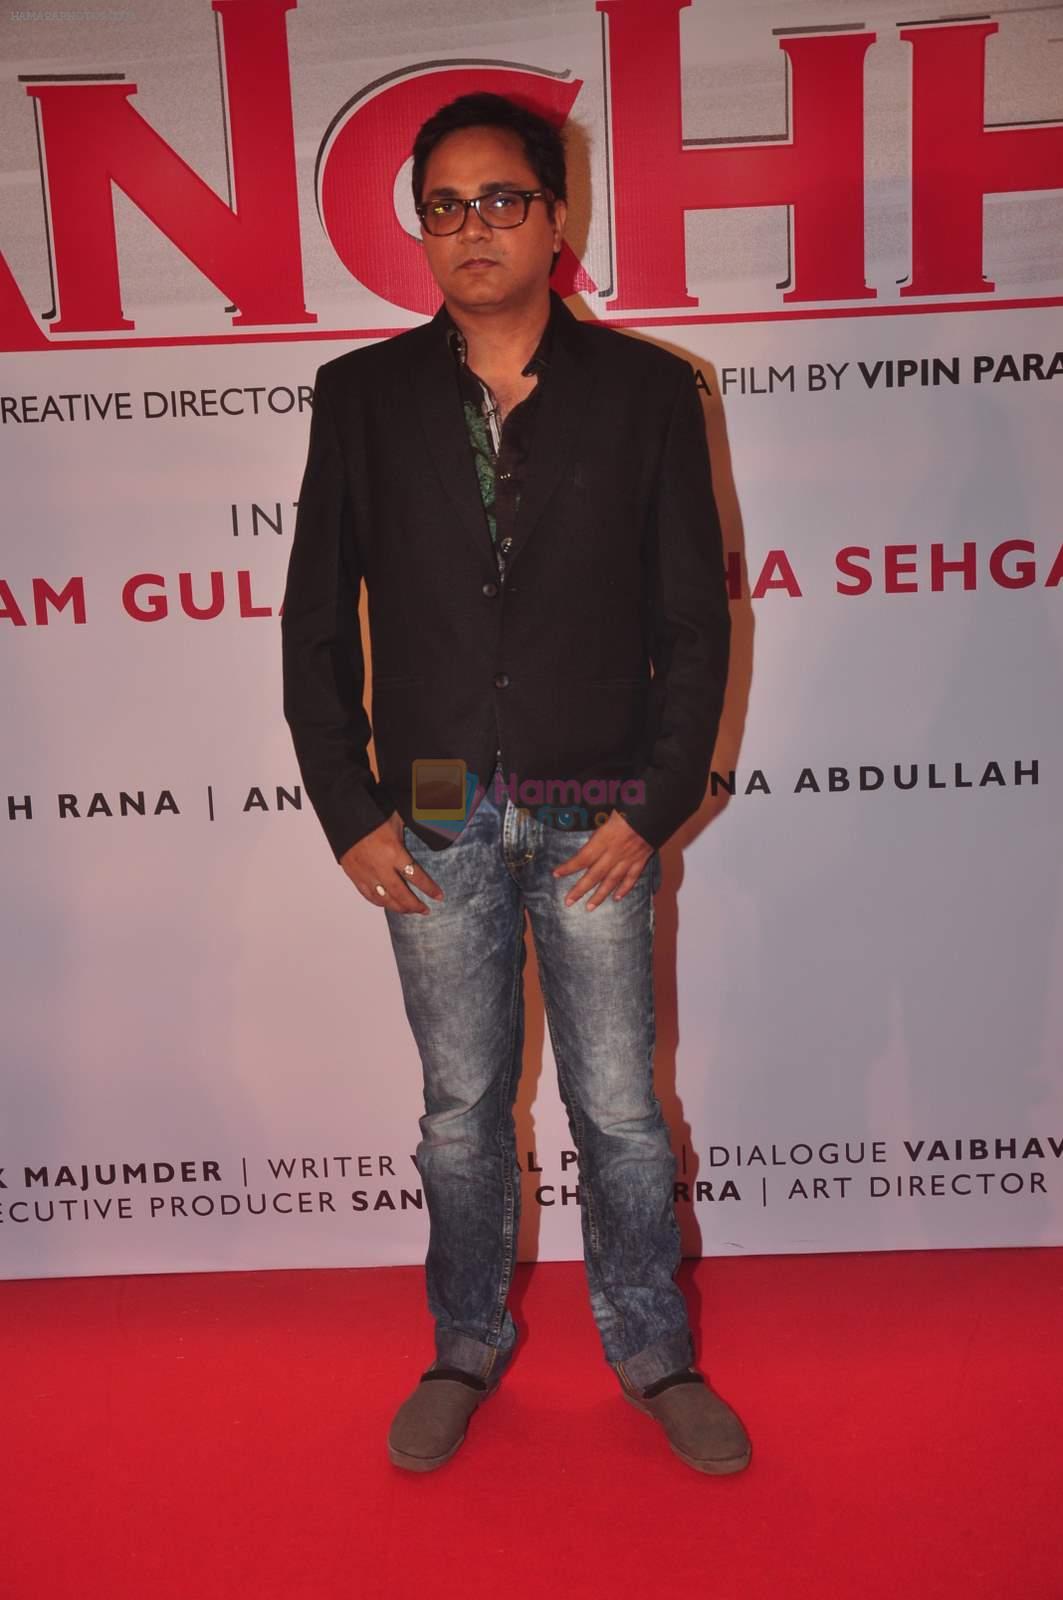 Vipin Parashar at the launch of R-Vision's movie Udanchhoo directed by Vipin Parashar in Mumbai on 31st March 2015